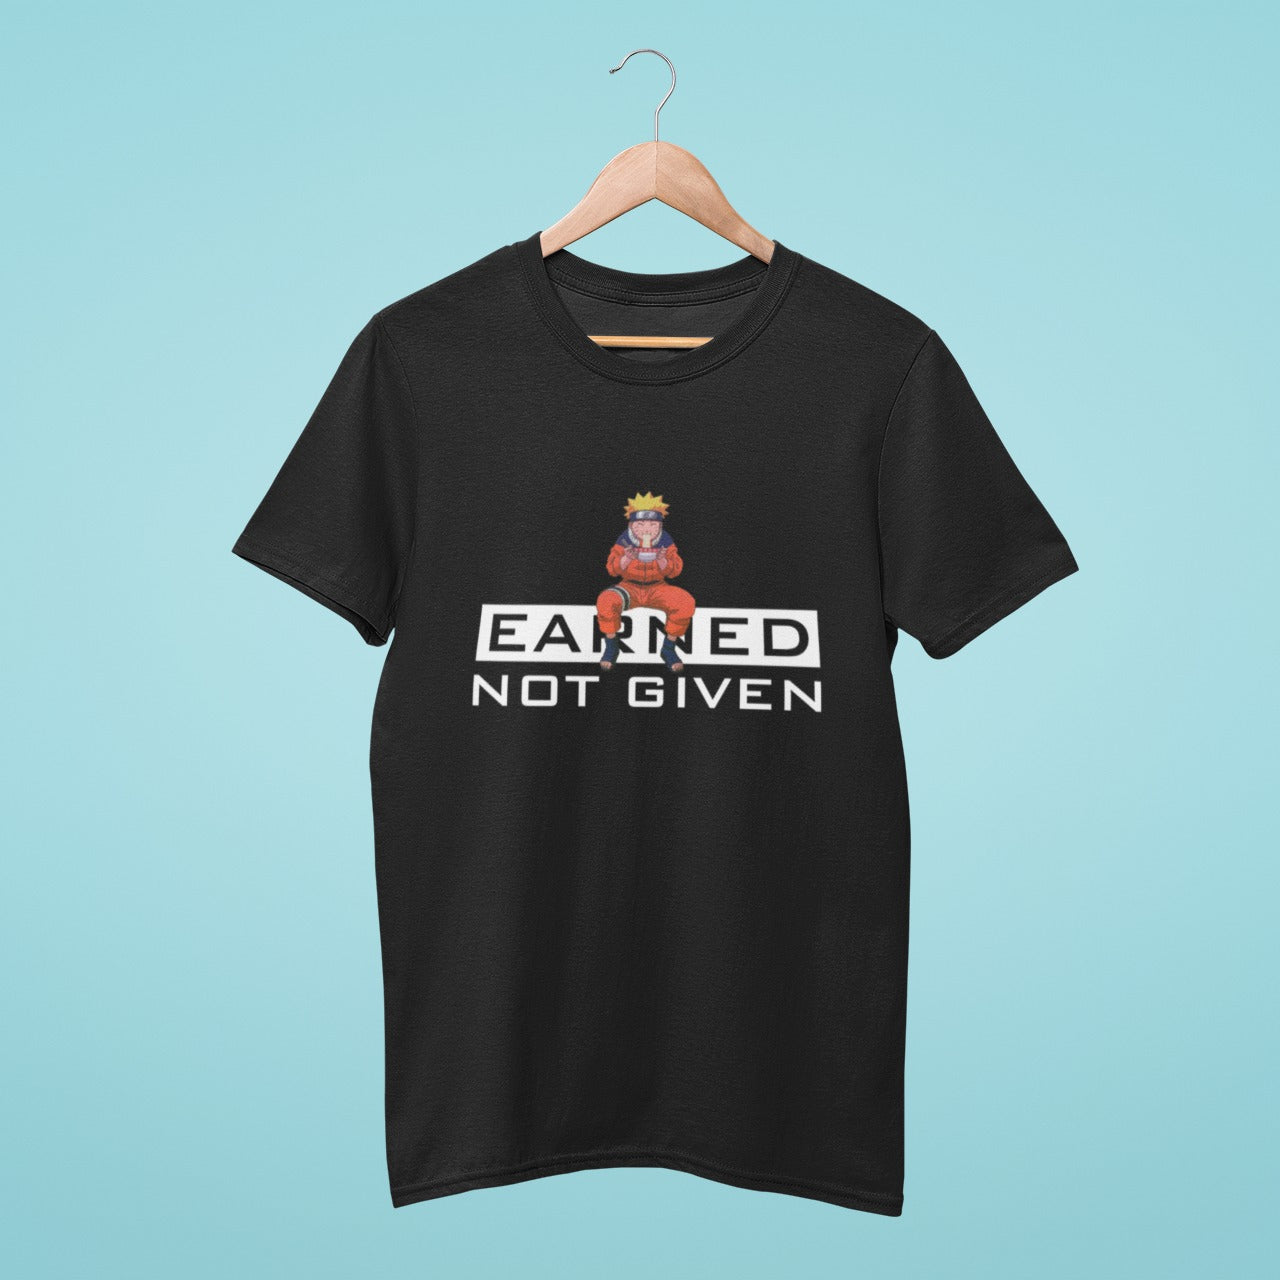 Show off your love for Naruto with our black t-shirt featuring the determined and hardworking ninja sitting on the inspiring message "Earned Not Given." Made with high-quality materials, this comfortable and durable t-shirt is perfect for any fan of the anime series. Order now and add this stylish t-shirt to your Naruto collection!